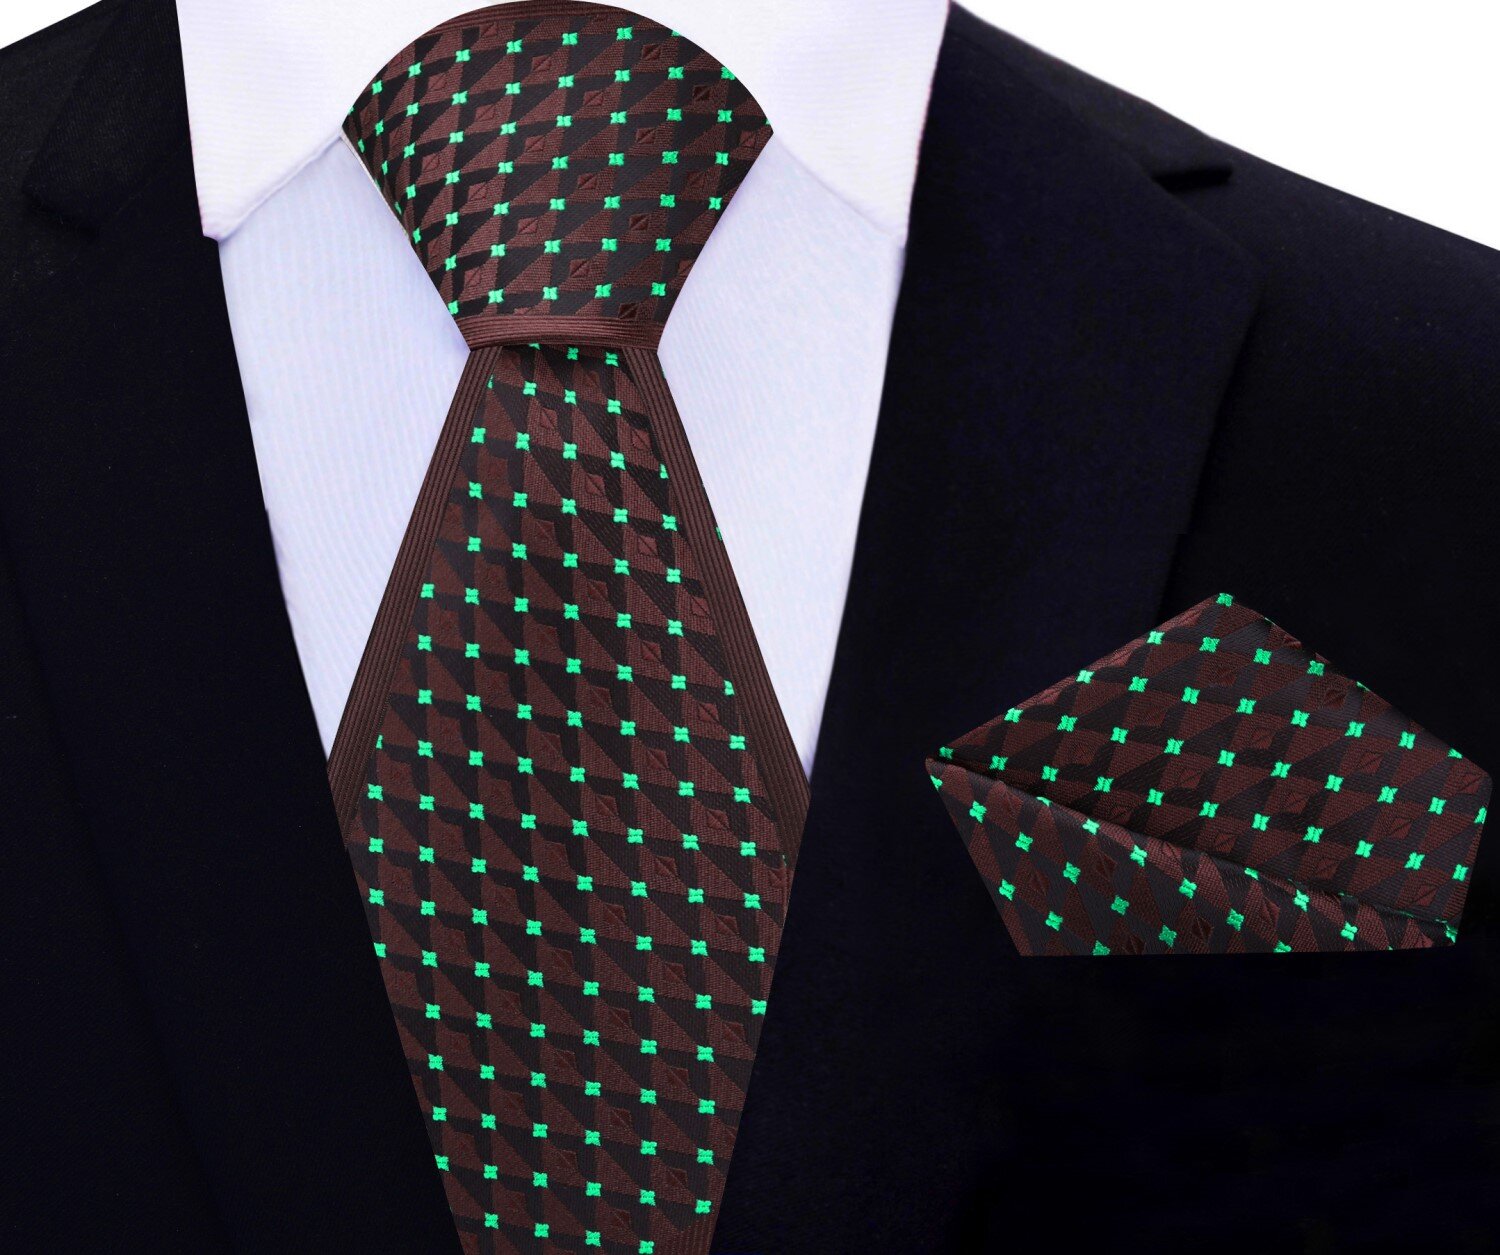 Main View: Chocolate and Mint Green Geometric Tie and Pocket Square